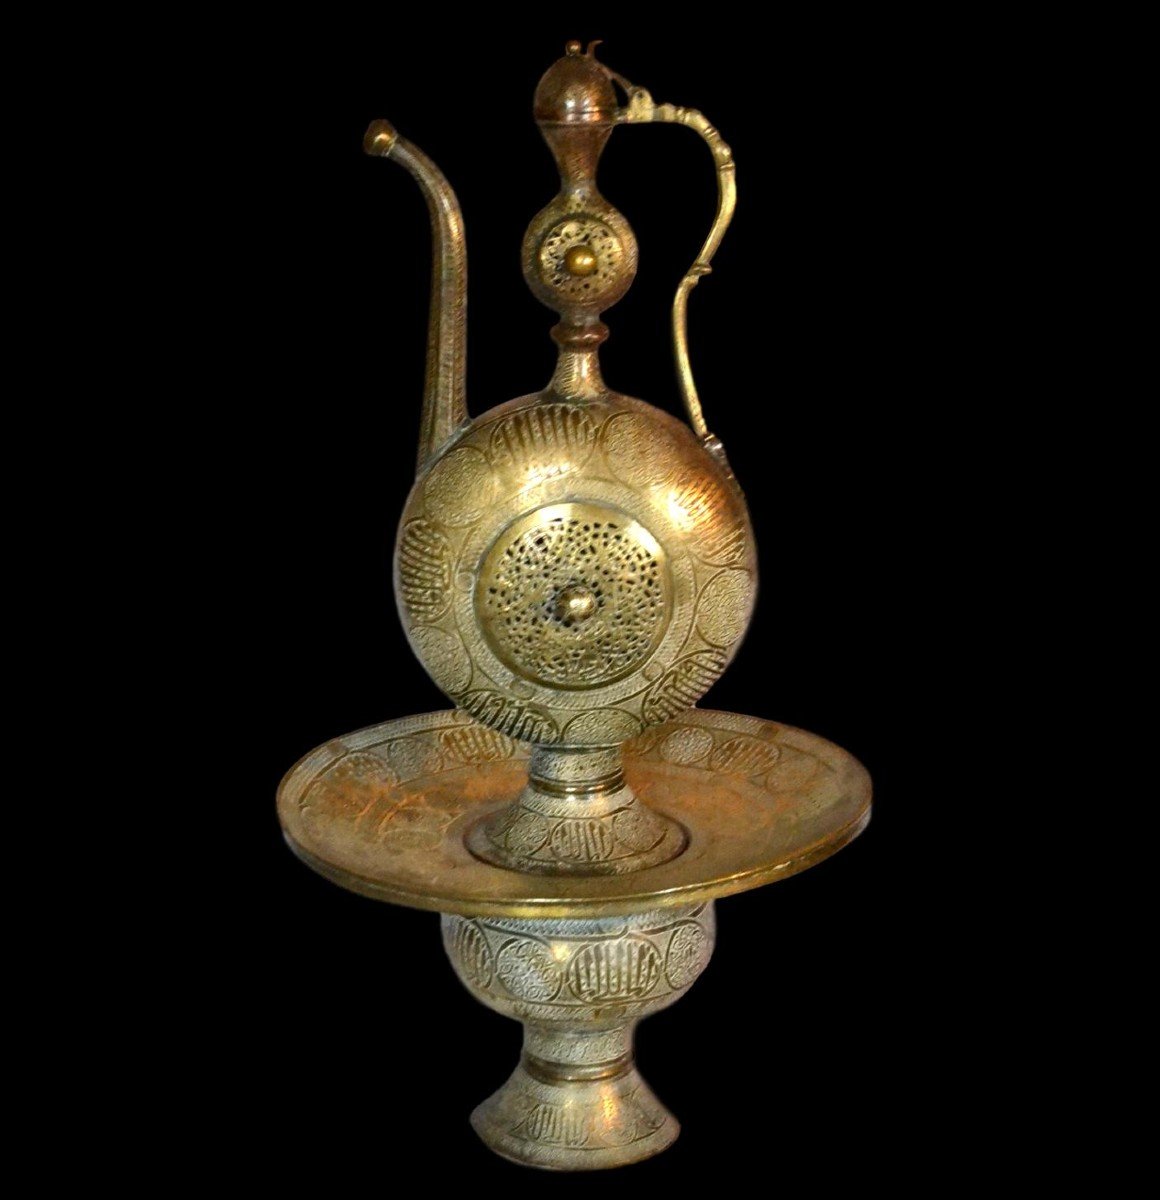 Important Ewer (h75 Cm) In Chiseled Brass, Daghestan, Caucasus, Second Part Of The 19th Century